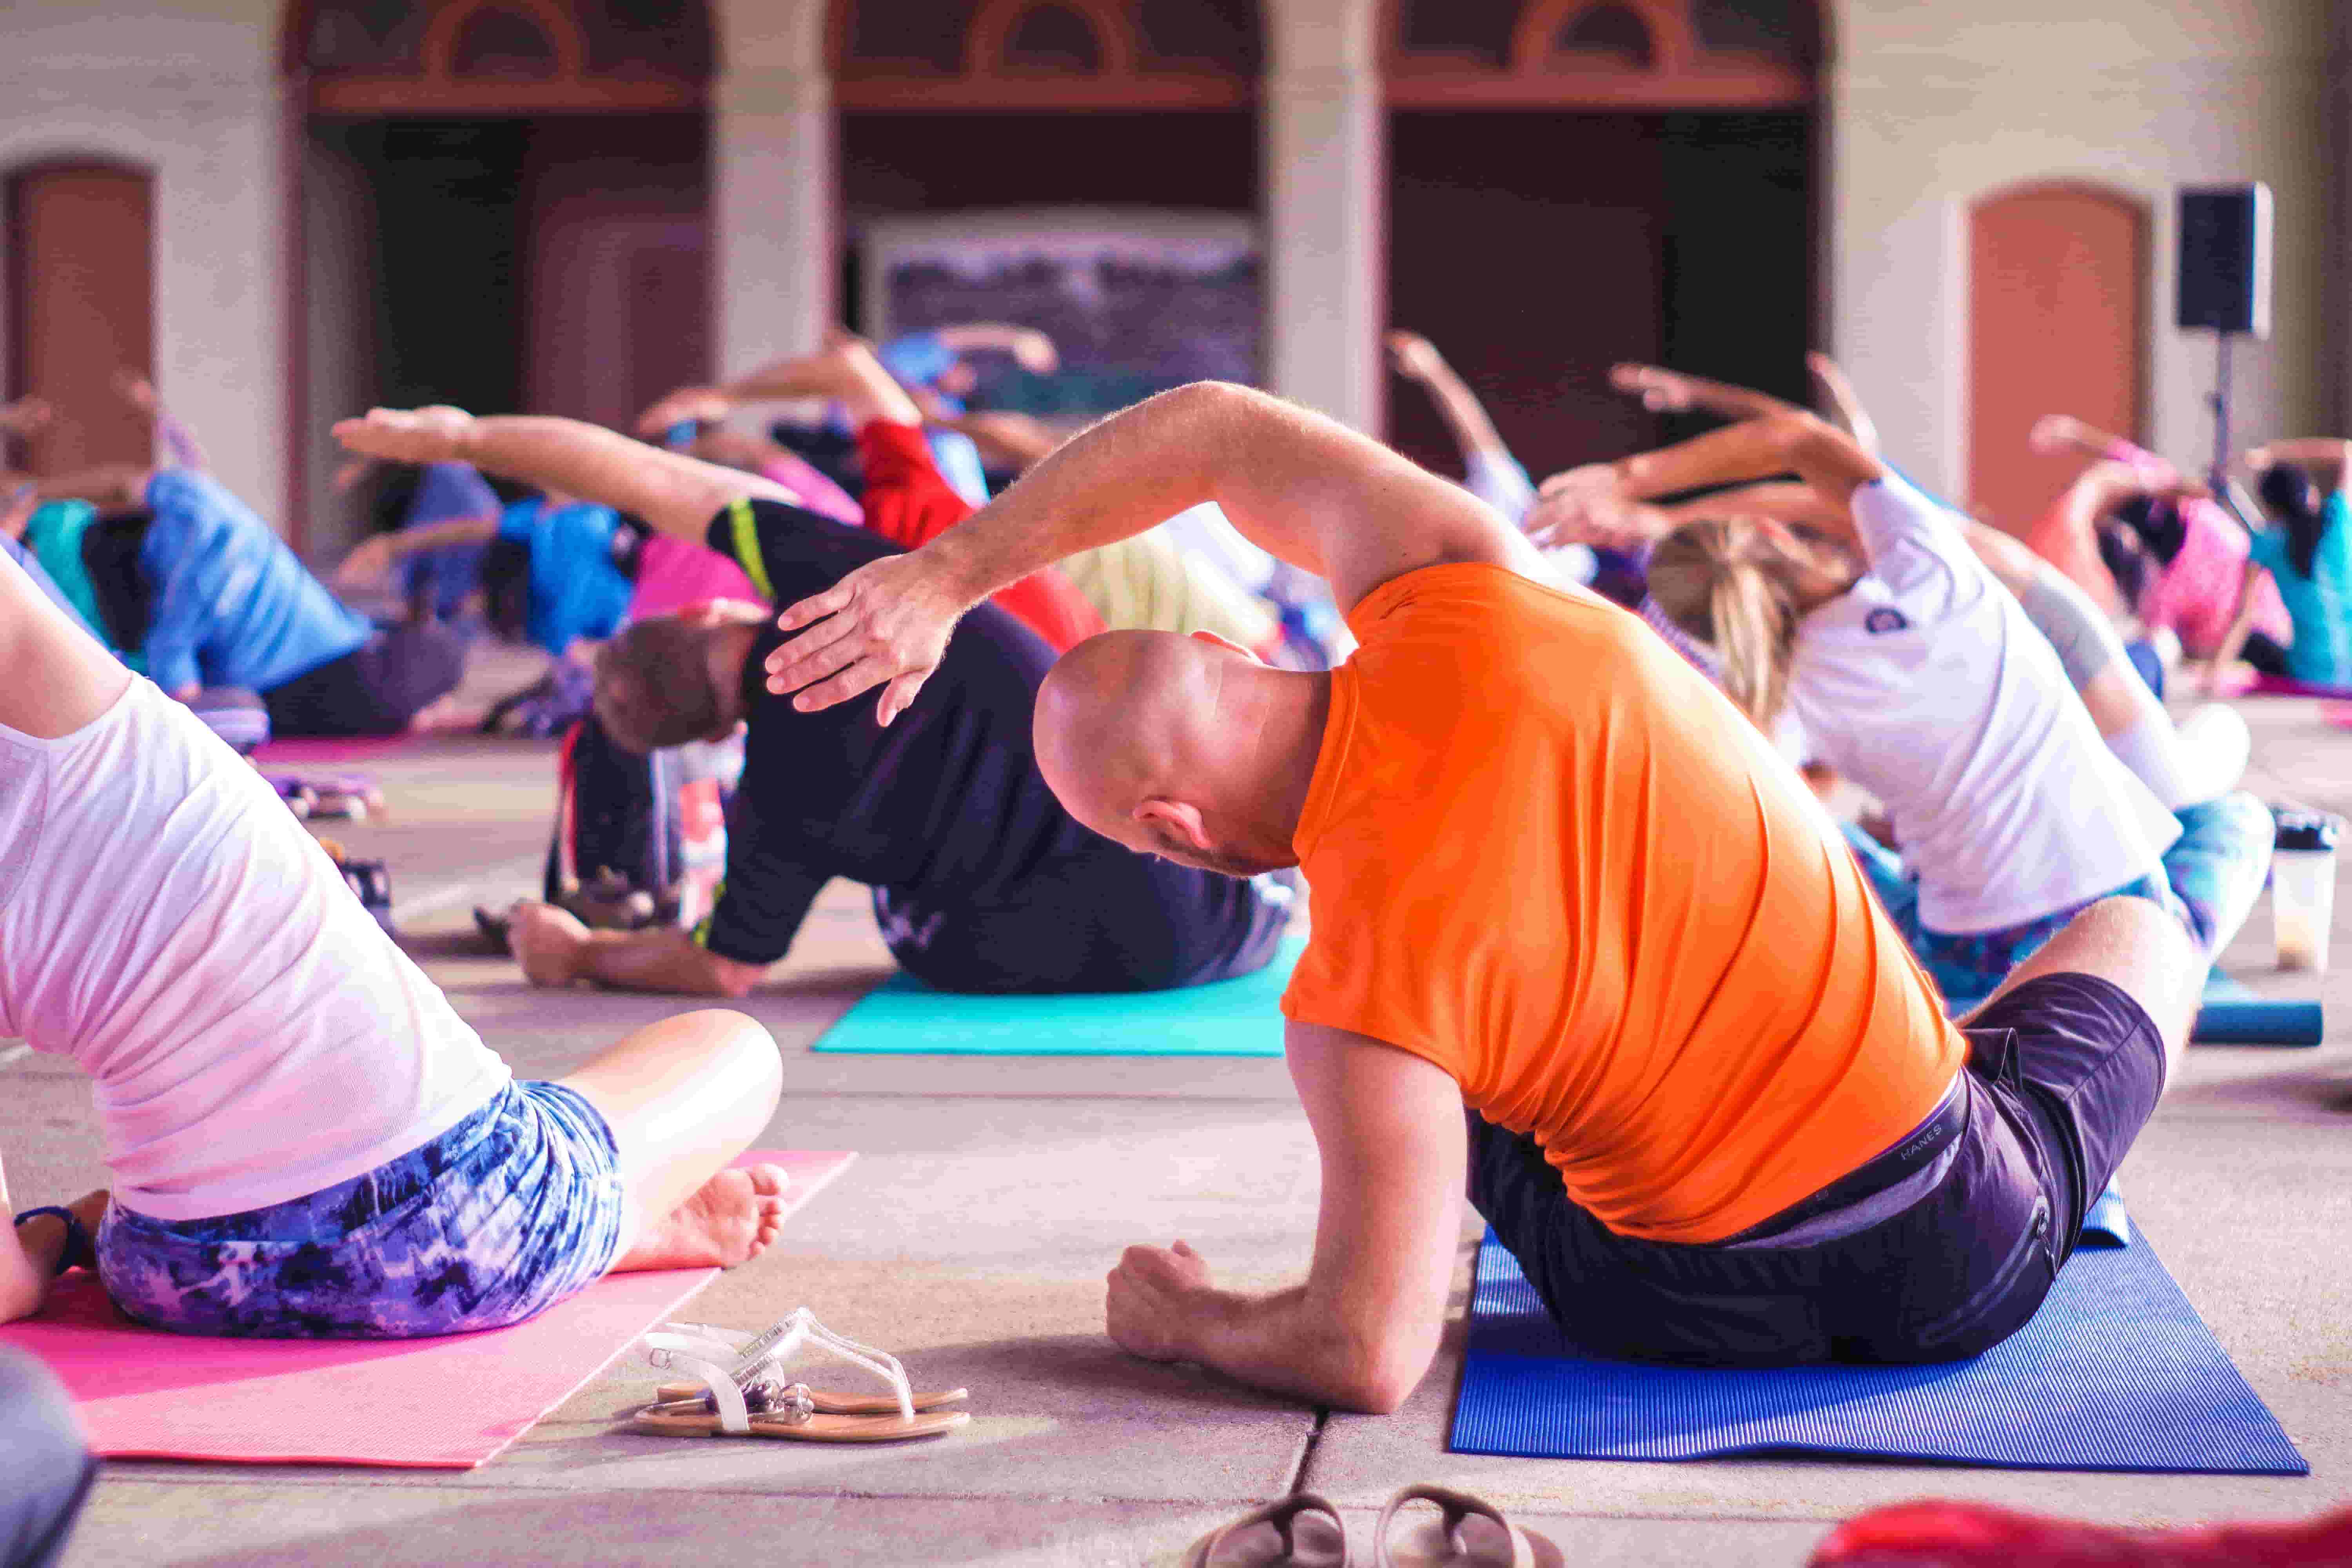 A middle-aged man takes part in a yoga class.